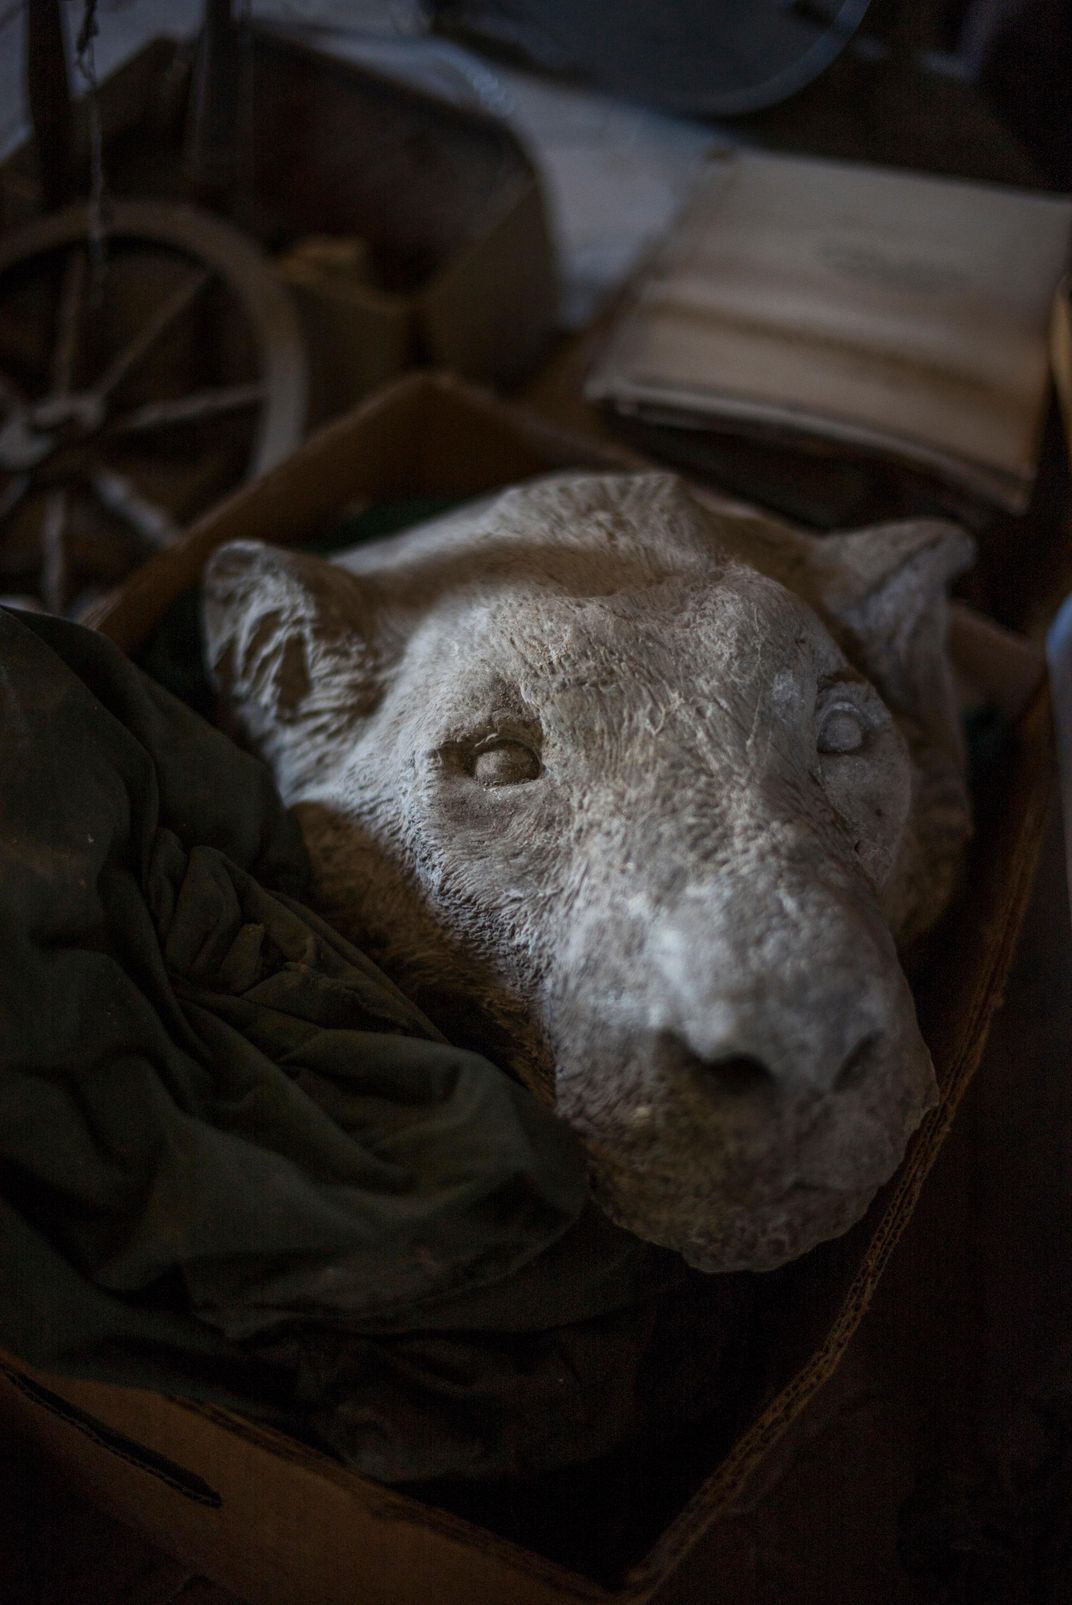 A realistic plaster head of a lioness sculpted by Bonheur and discovered by Brault in a dusty attic. Photograph by Claudine Doury via the Smithsonian Magazine.